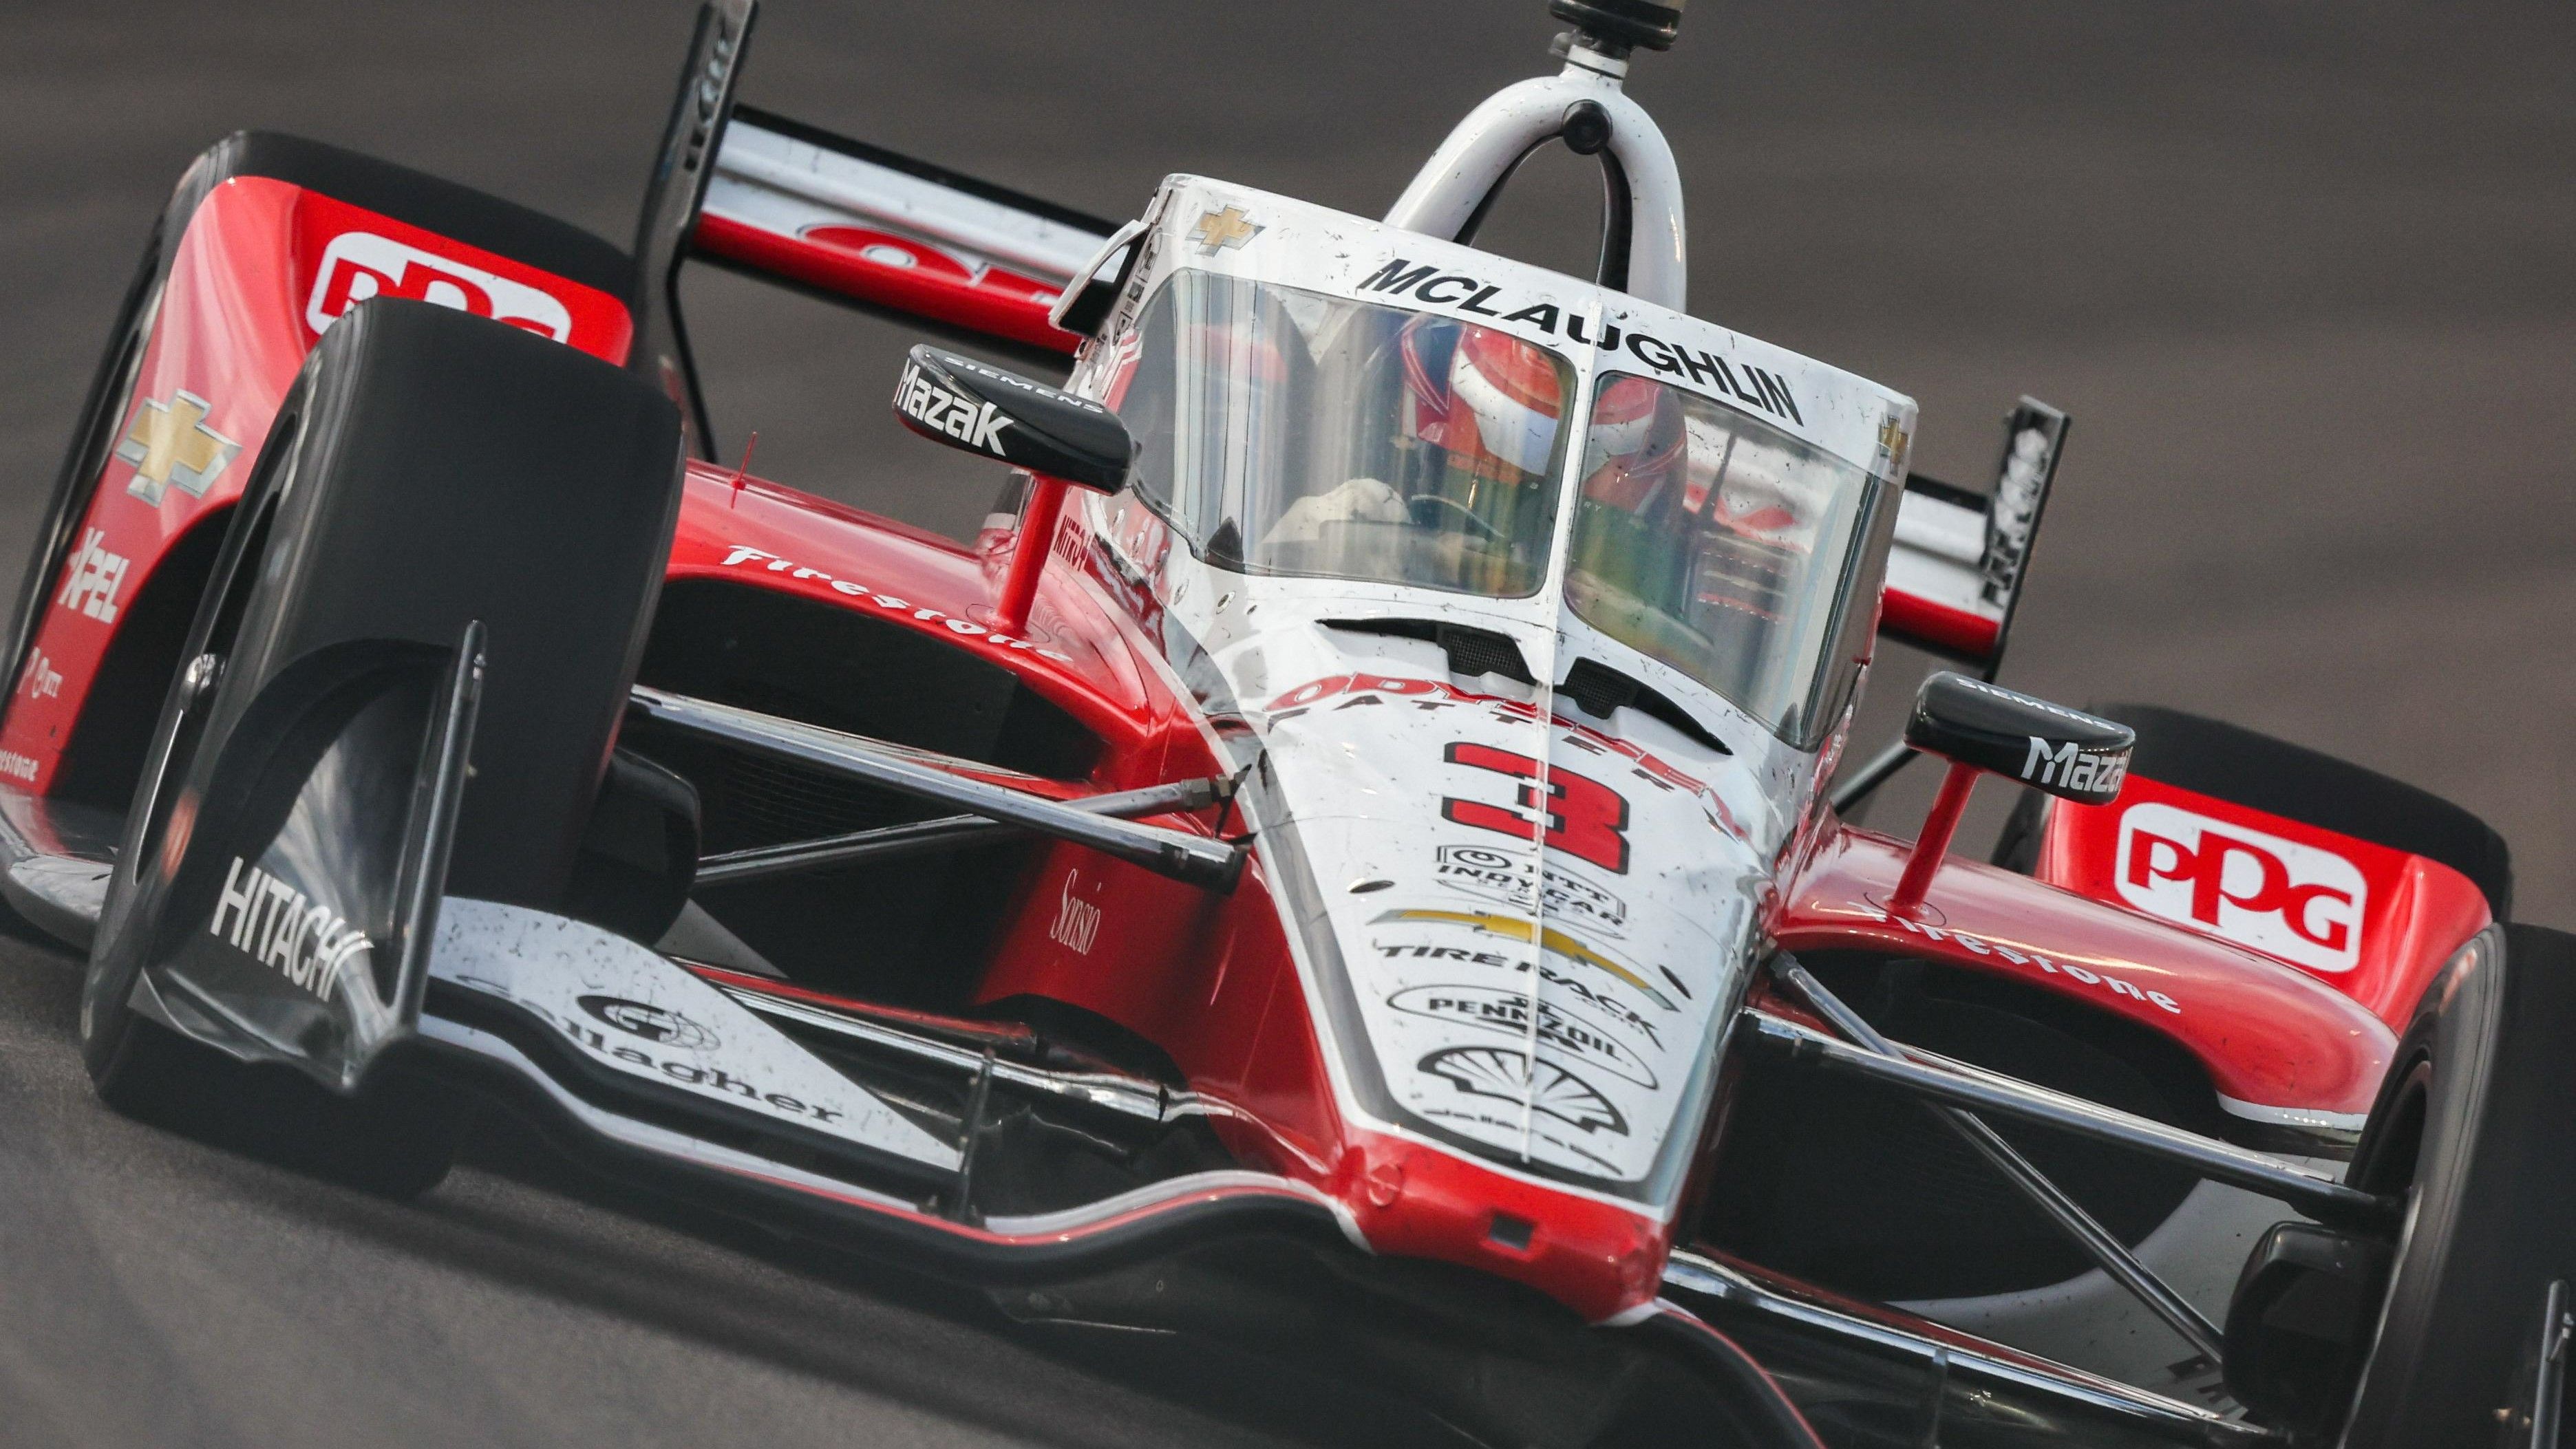 Scott McLaughlin drives the No.3 for Team Penske in the IndyCar Series.